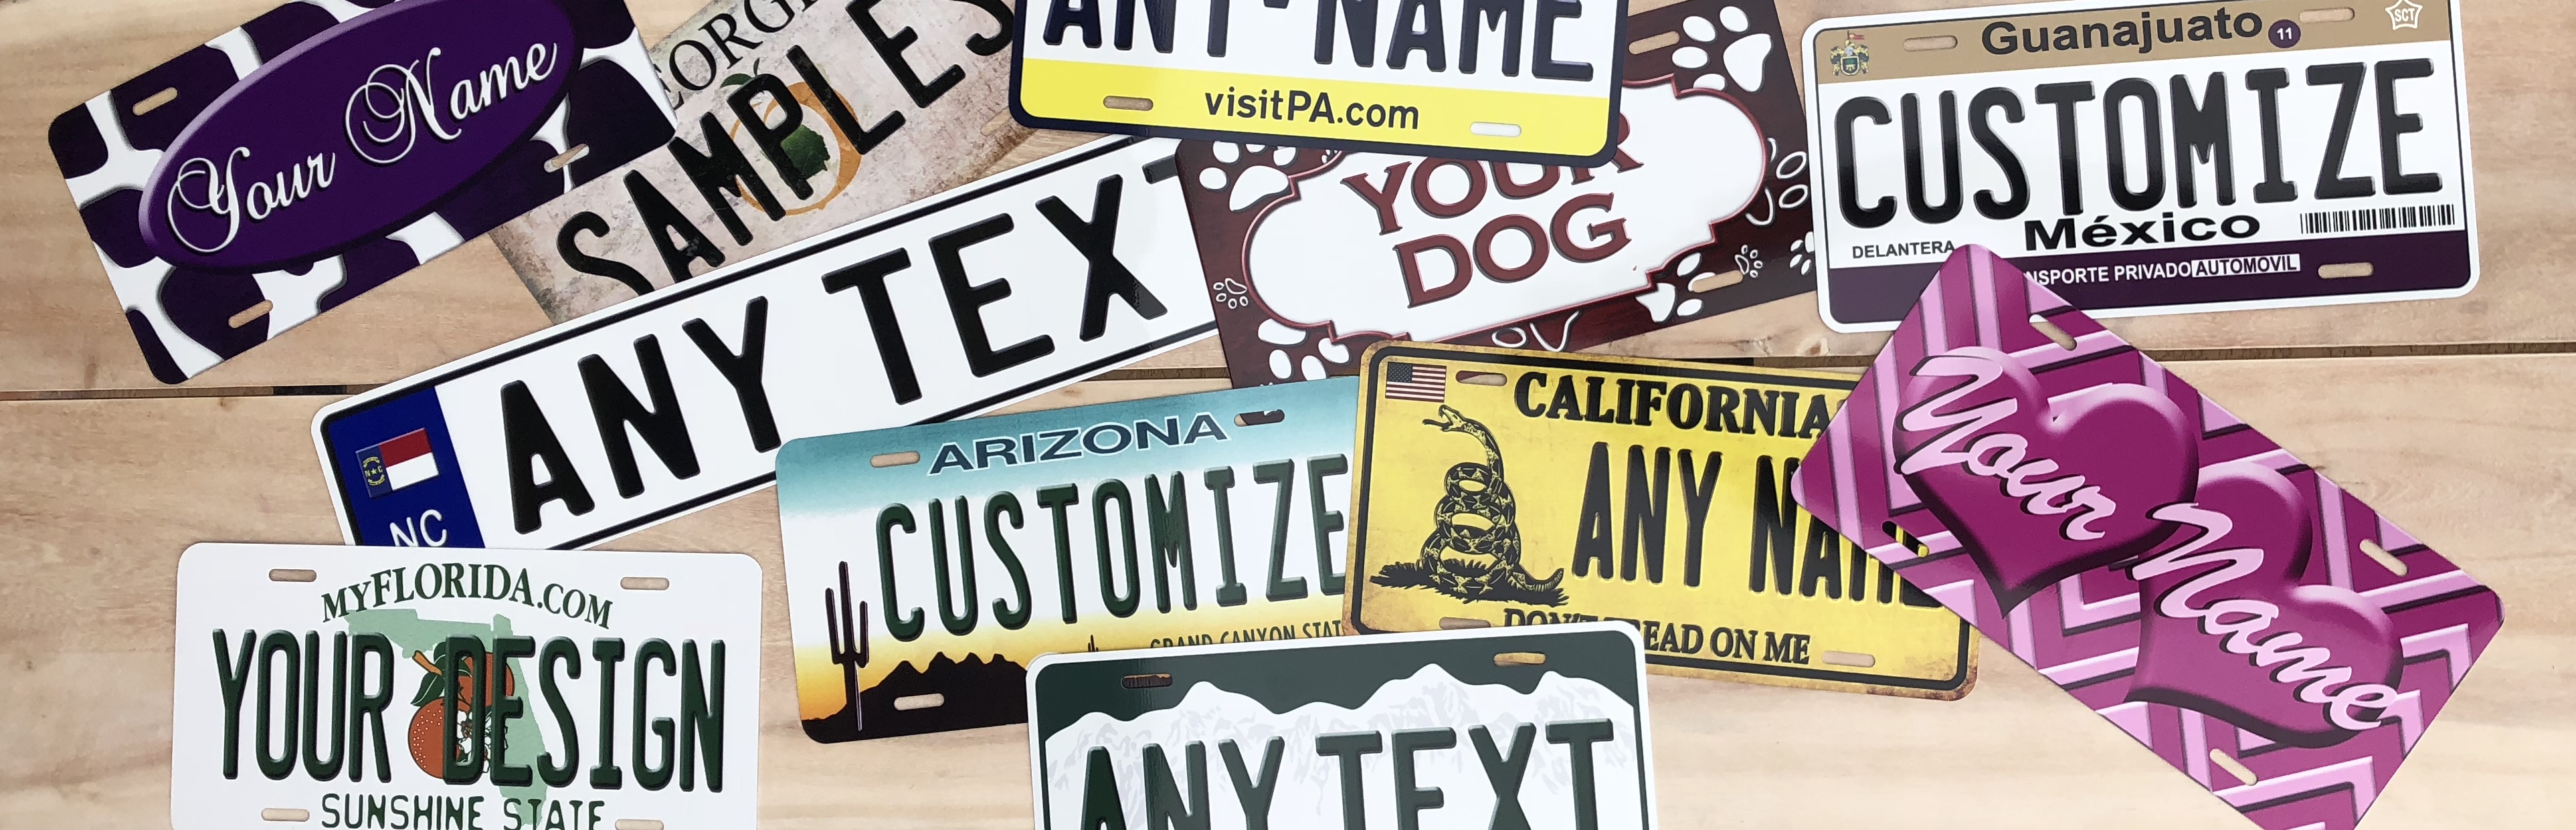 customize your own car tag